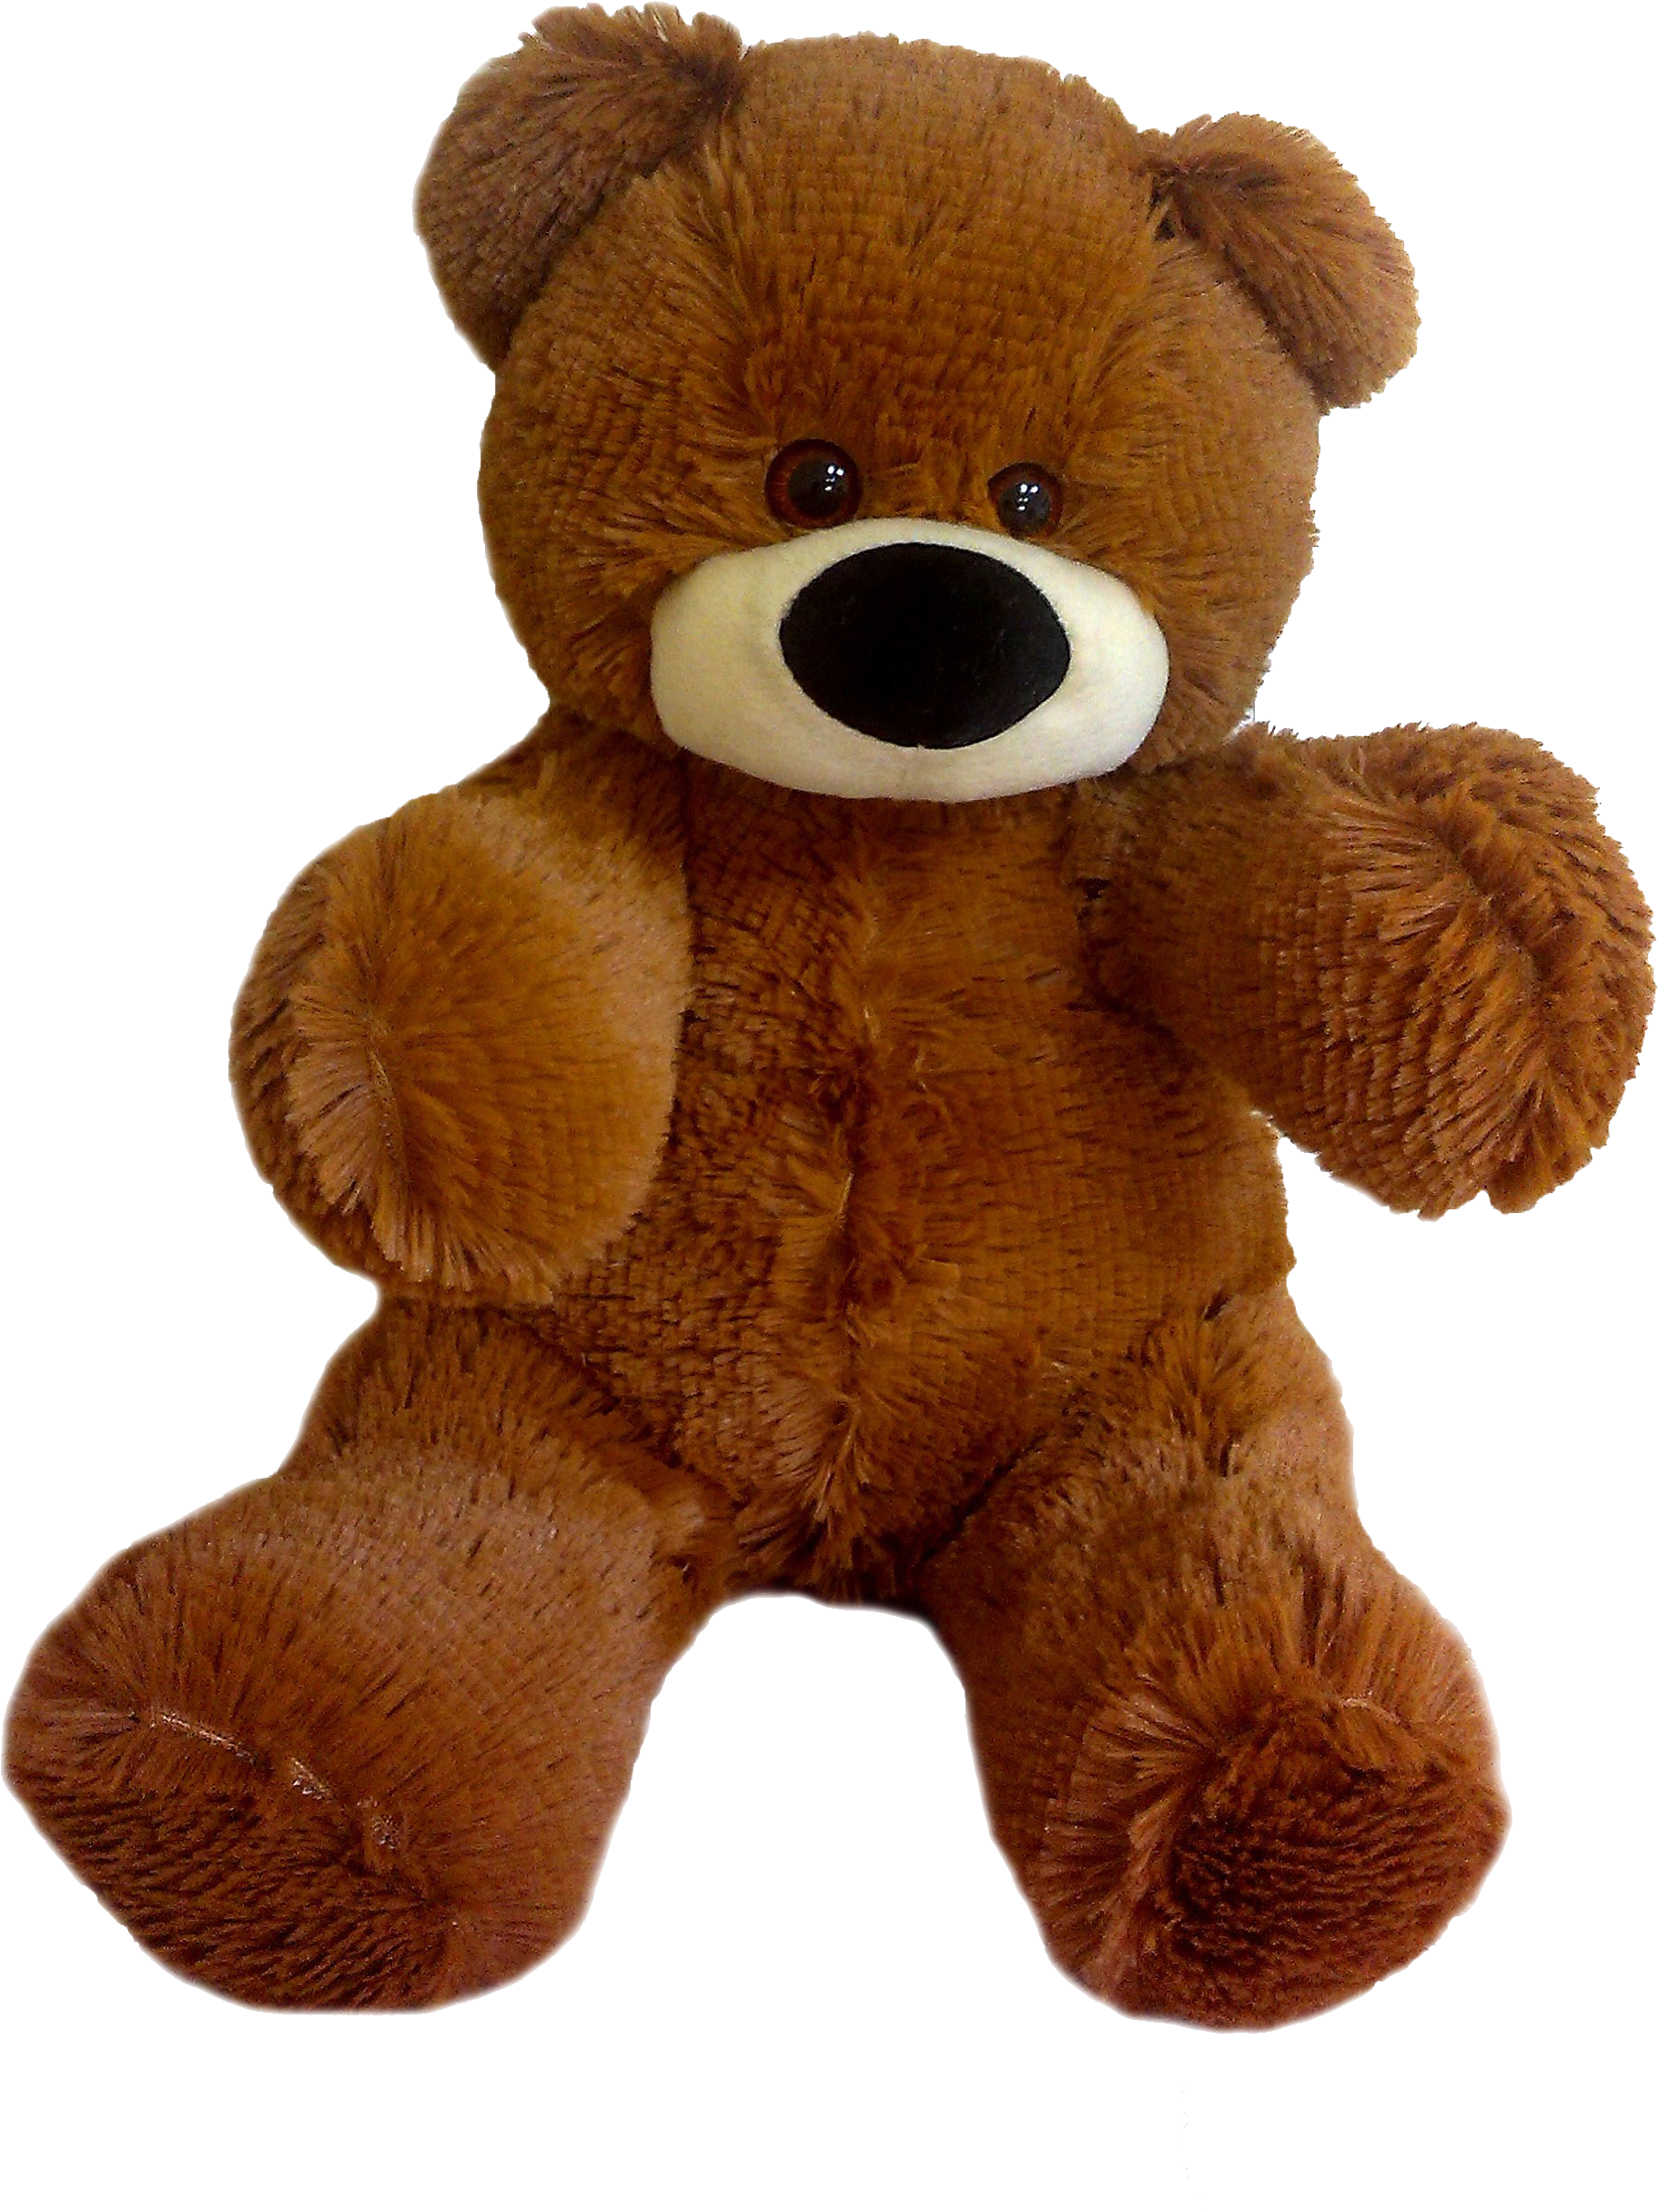 Download Teddy bear PNG